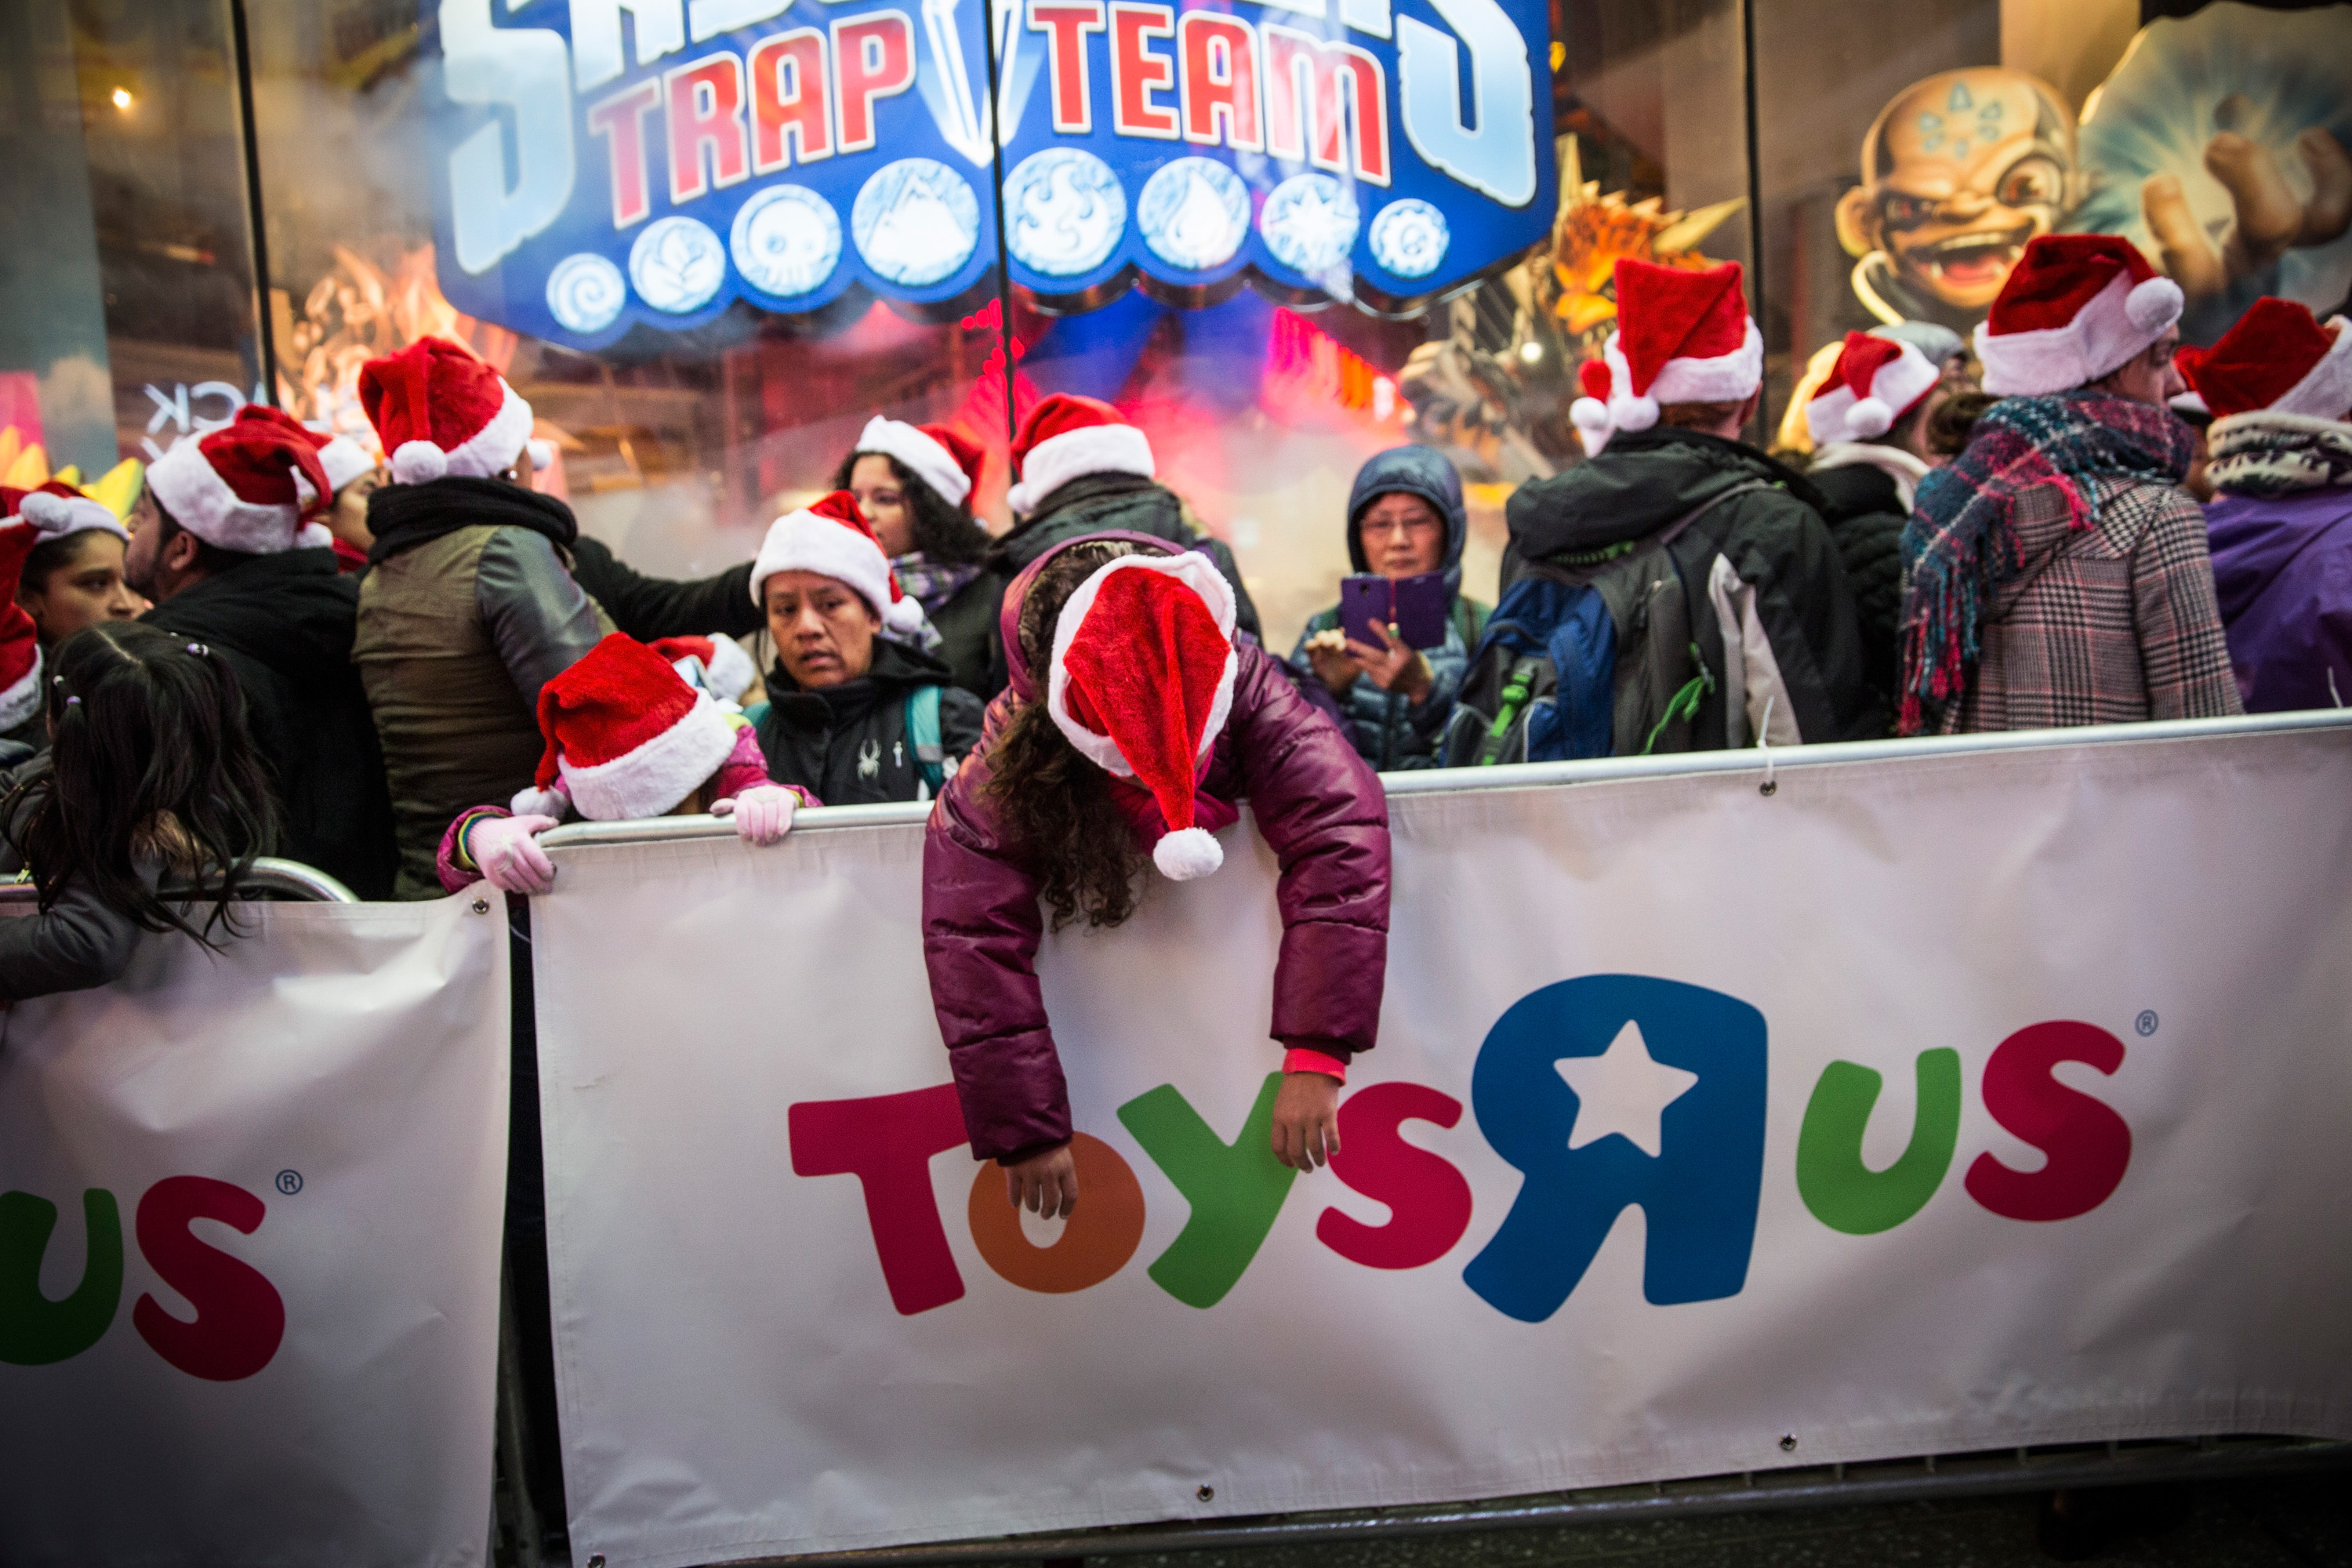 toys r us bankruptcy, toys r us files for bankruptcy, chapter 11 bankruptcy, chapter 7 bankruptcy 